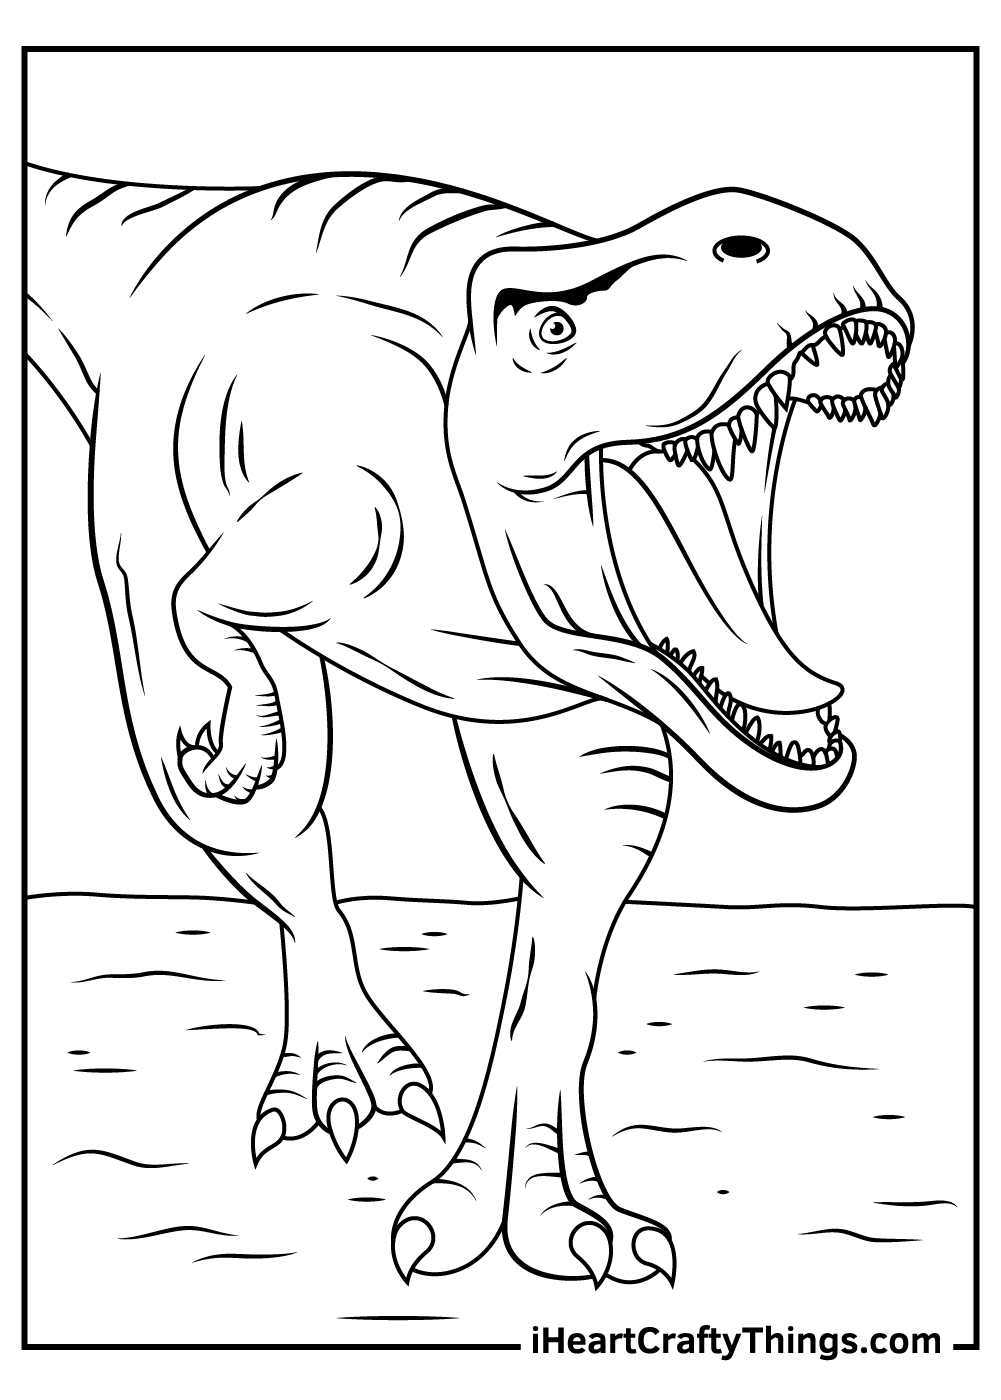 Printable Jurassic Park Coloring Pages Updated 20